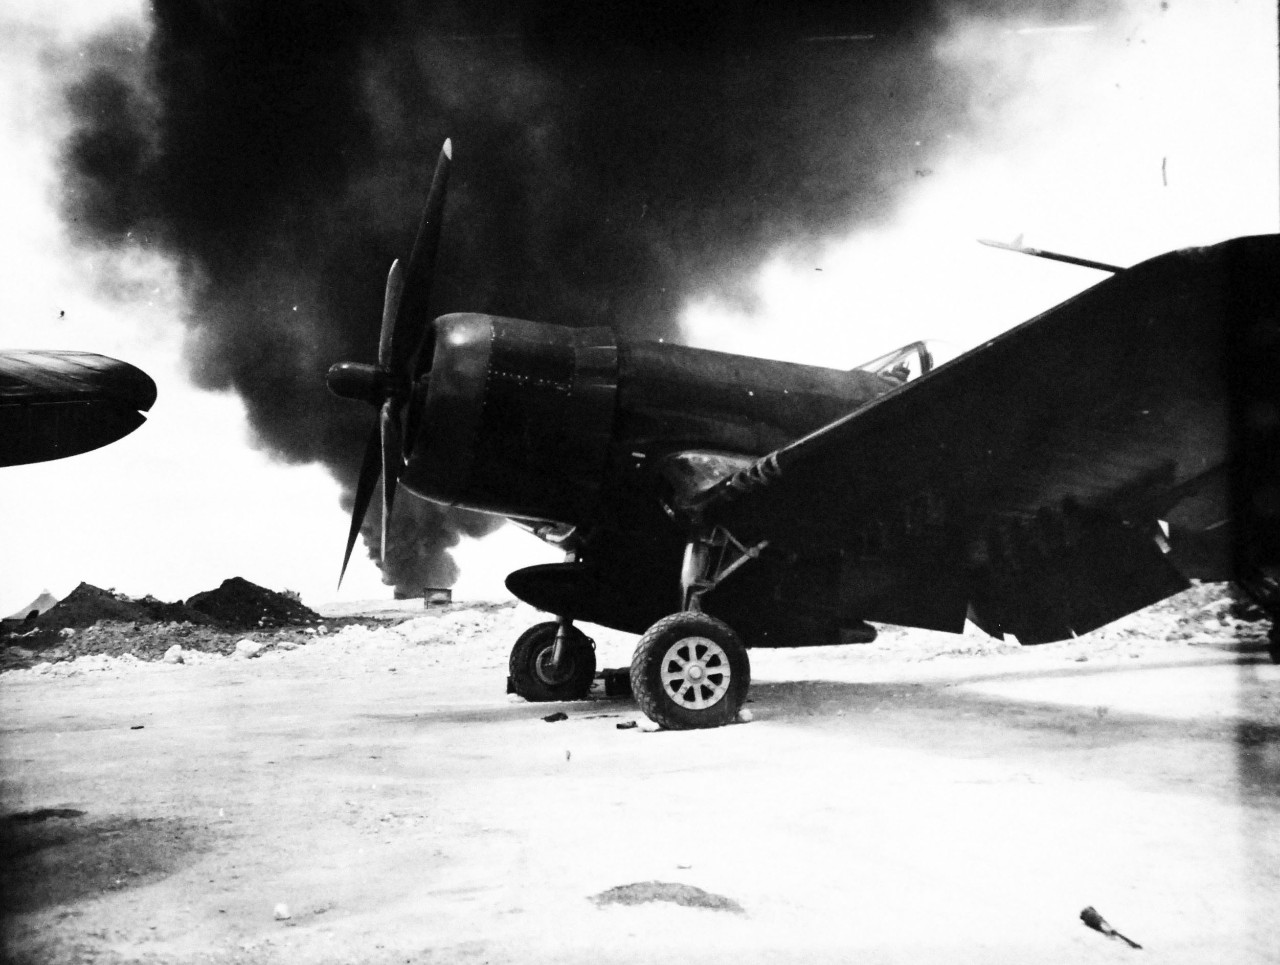 127-GW-524-125708:  Vought F4U Corsair, June 1945.  Against a background of heavy smoke which belched from a fuel dump fire on Okinawa, the F4U-4 “Corsair” fighter stands in its revetment.   Photographed by Corporal W.C. Beall, 19 June 1945. Official U.S. Marine Corps photograph, now in the collections of the National Archives. 